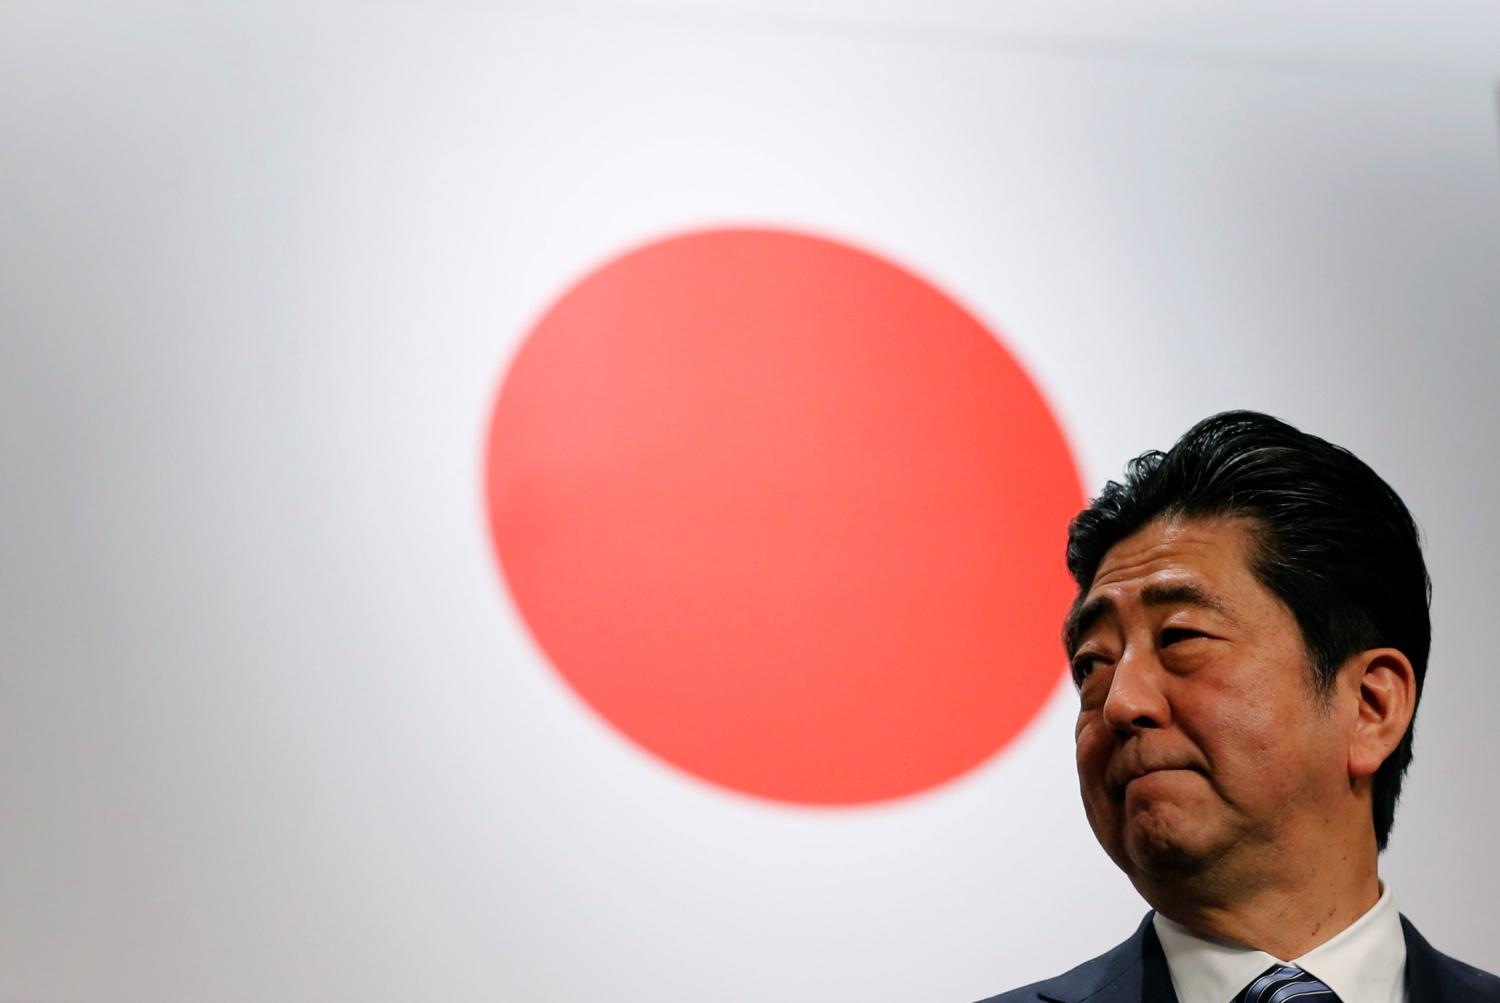 Japan's Prime Minister Shinzo Abe stands in front of Japan's national flag after his ruling Liberal Democratic Party's (LDP) annual party convention in Tokyo, Japan, March 5, 2017.  REUTERS/Toru Hanai - RC1EEE131EC0